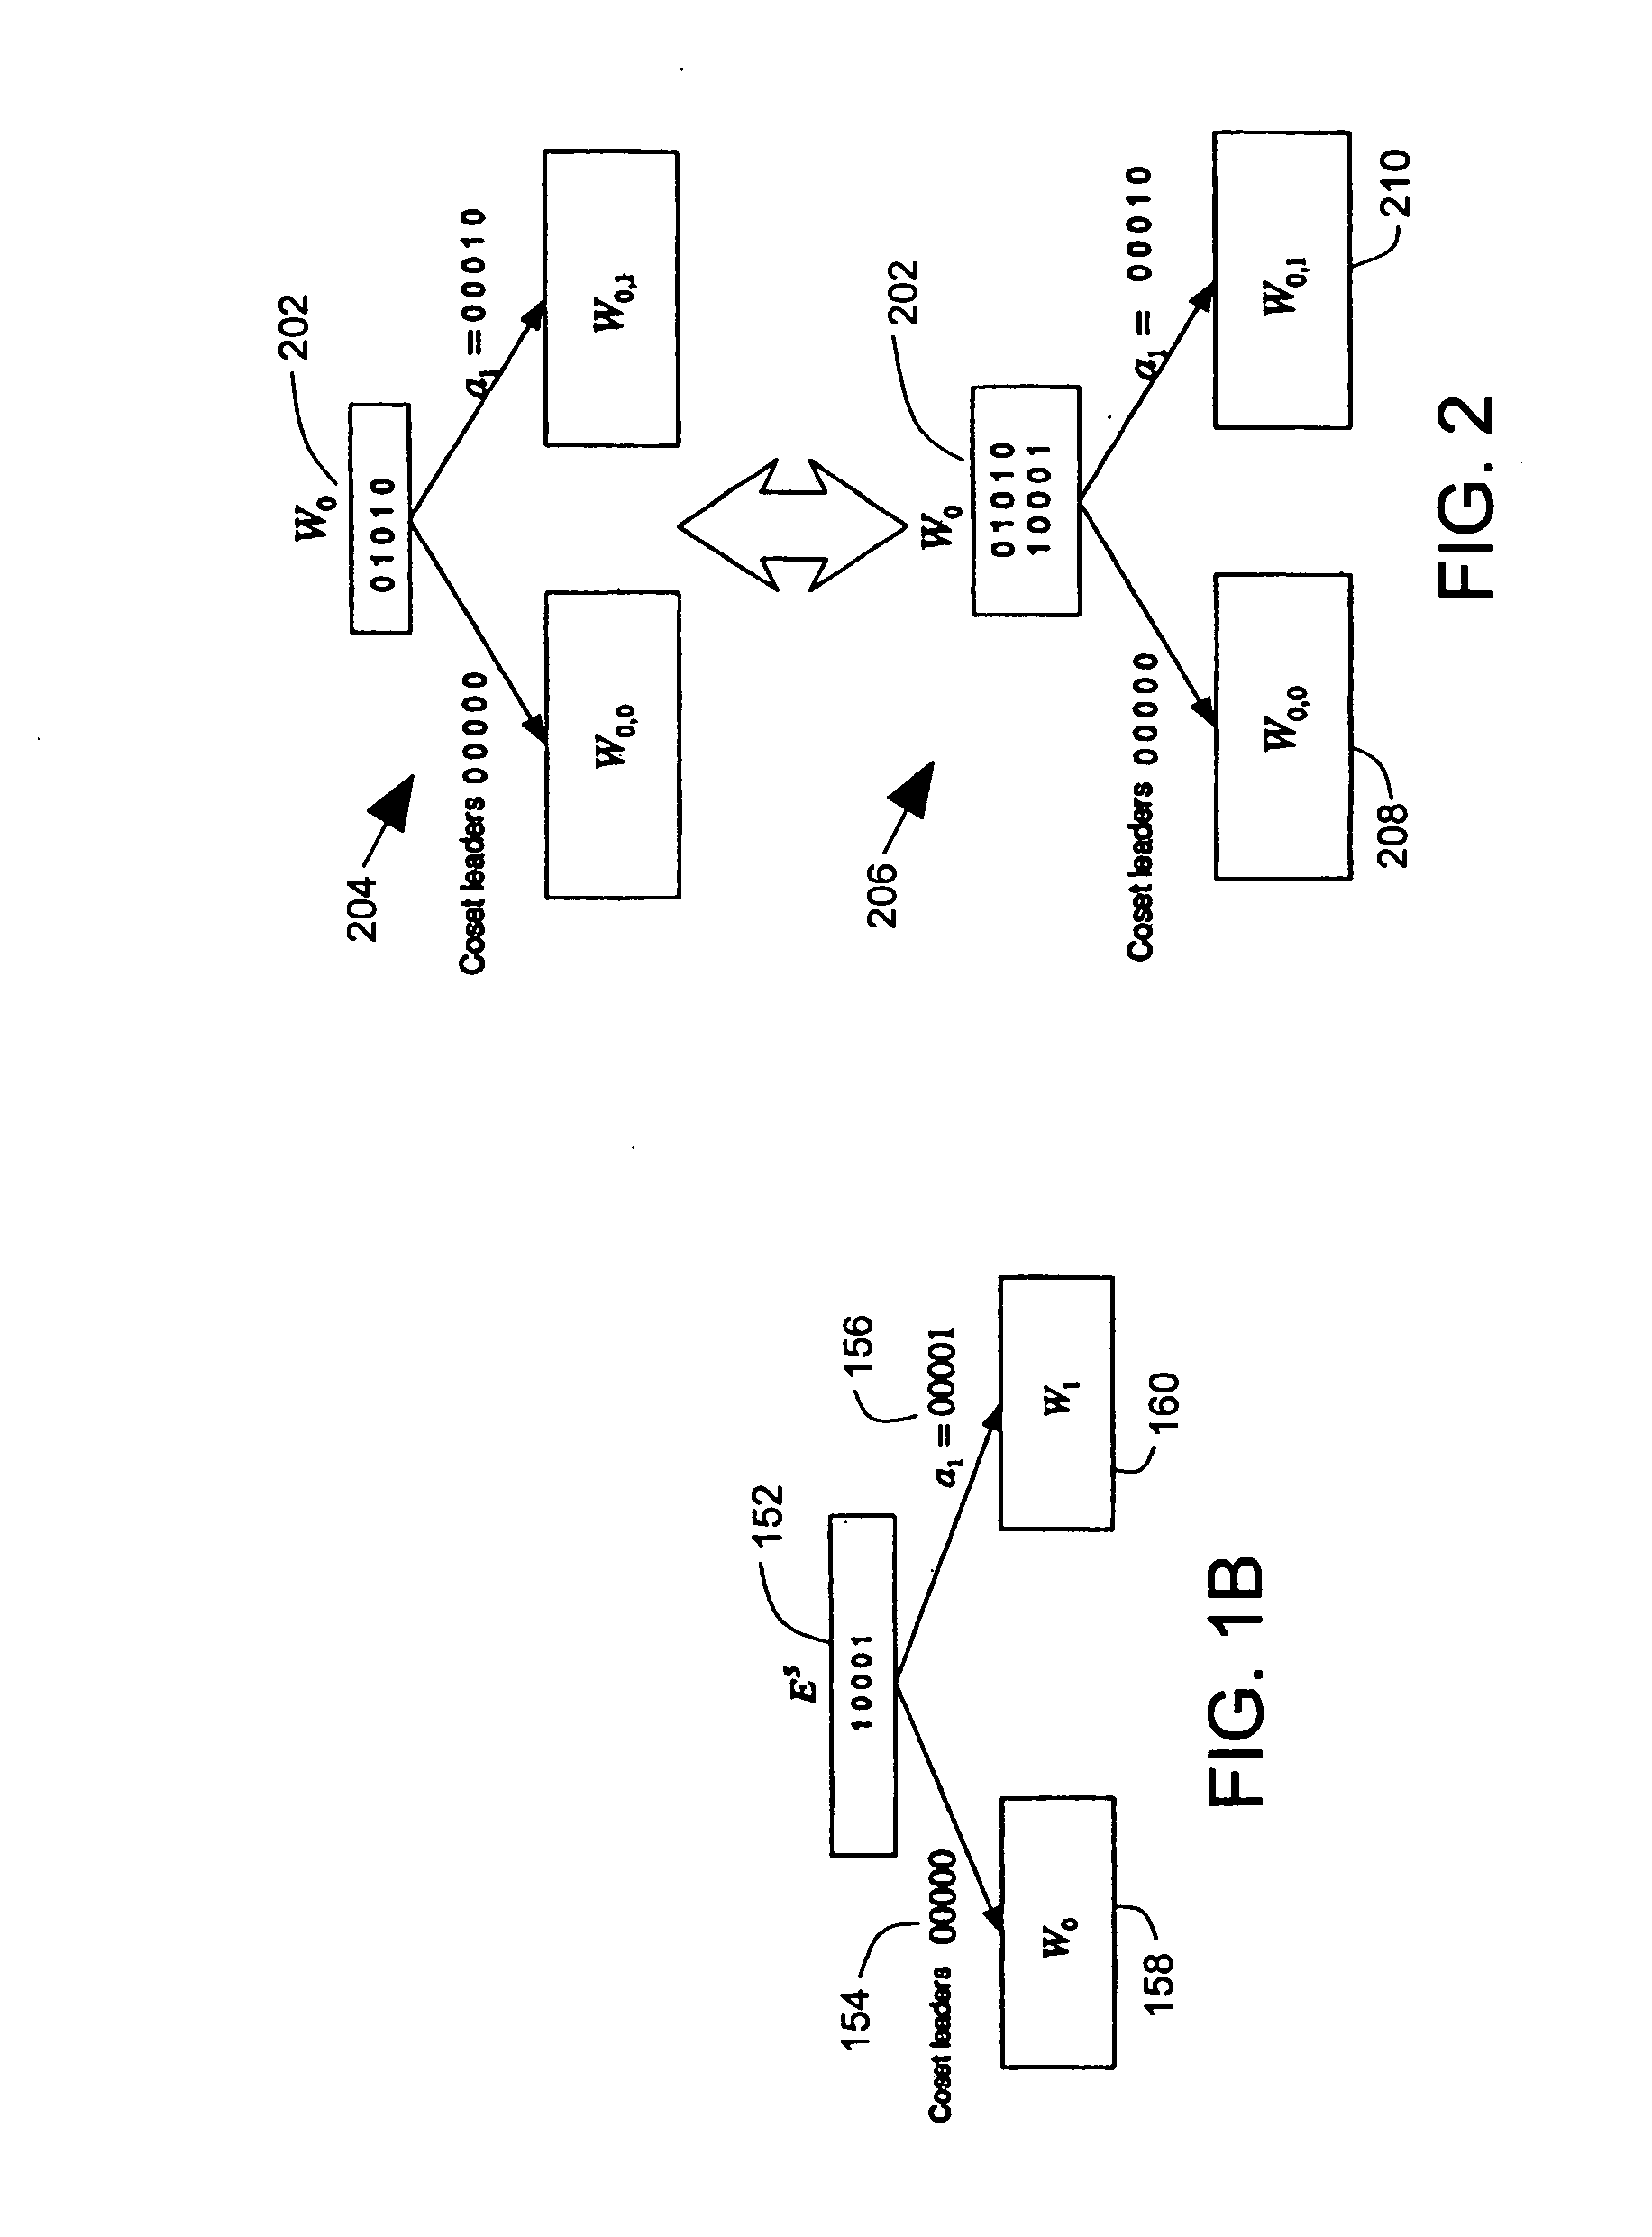 Structured set partitioning and multilevel coding for partial response channels